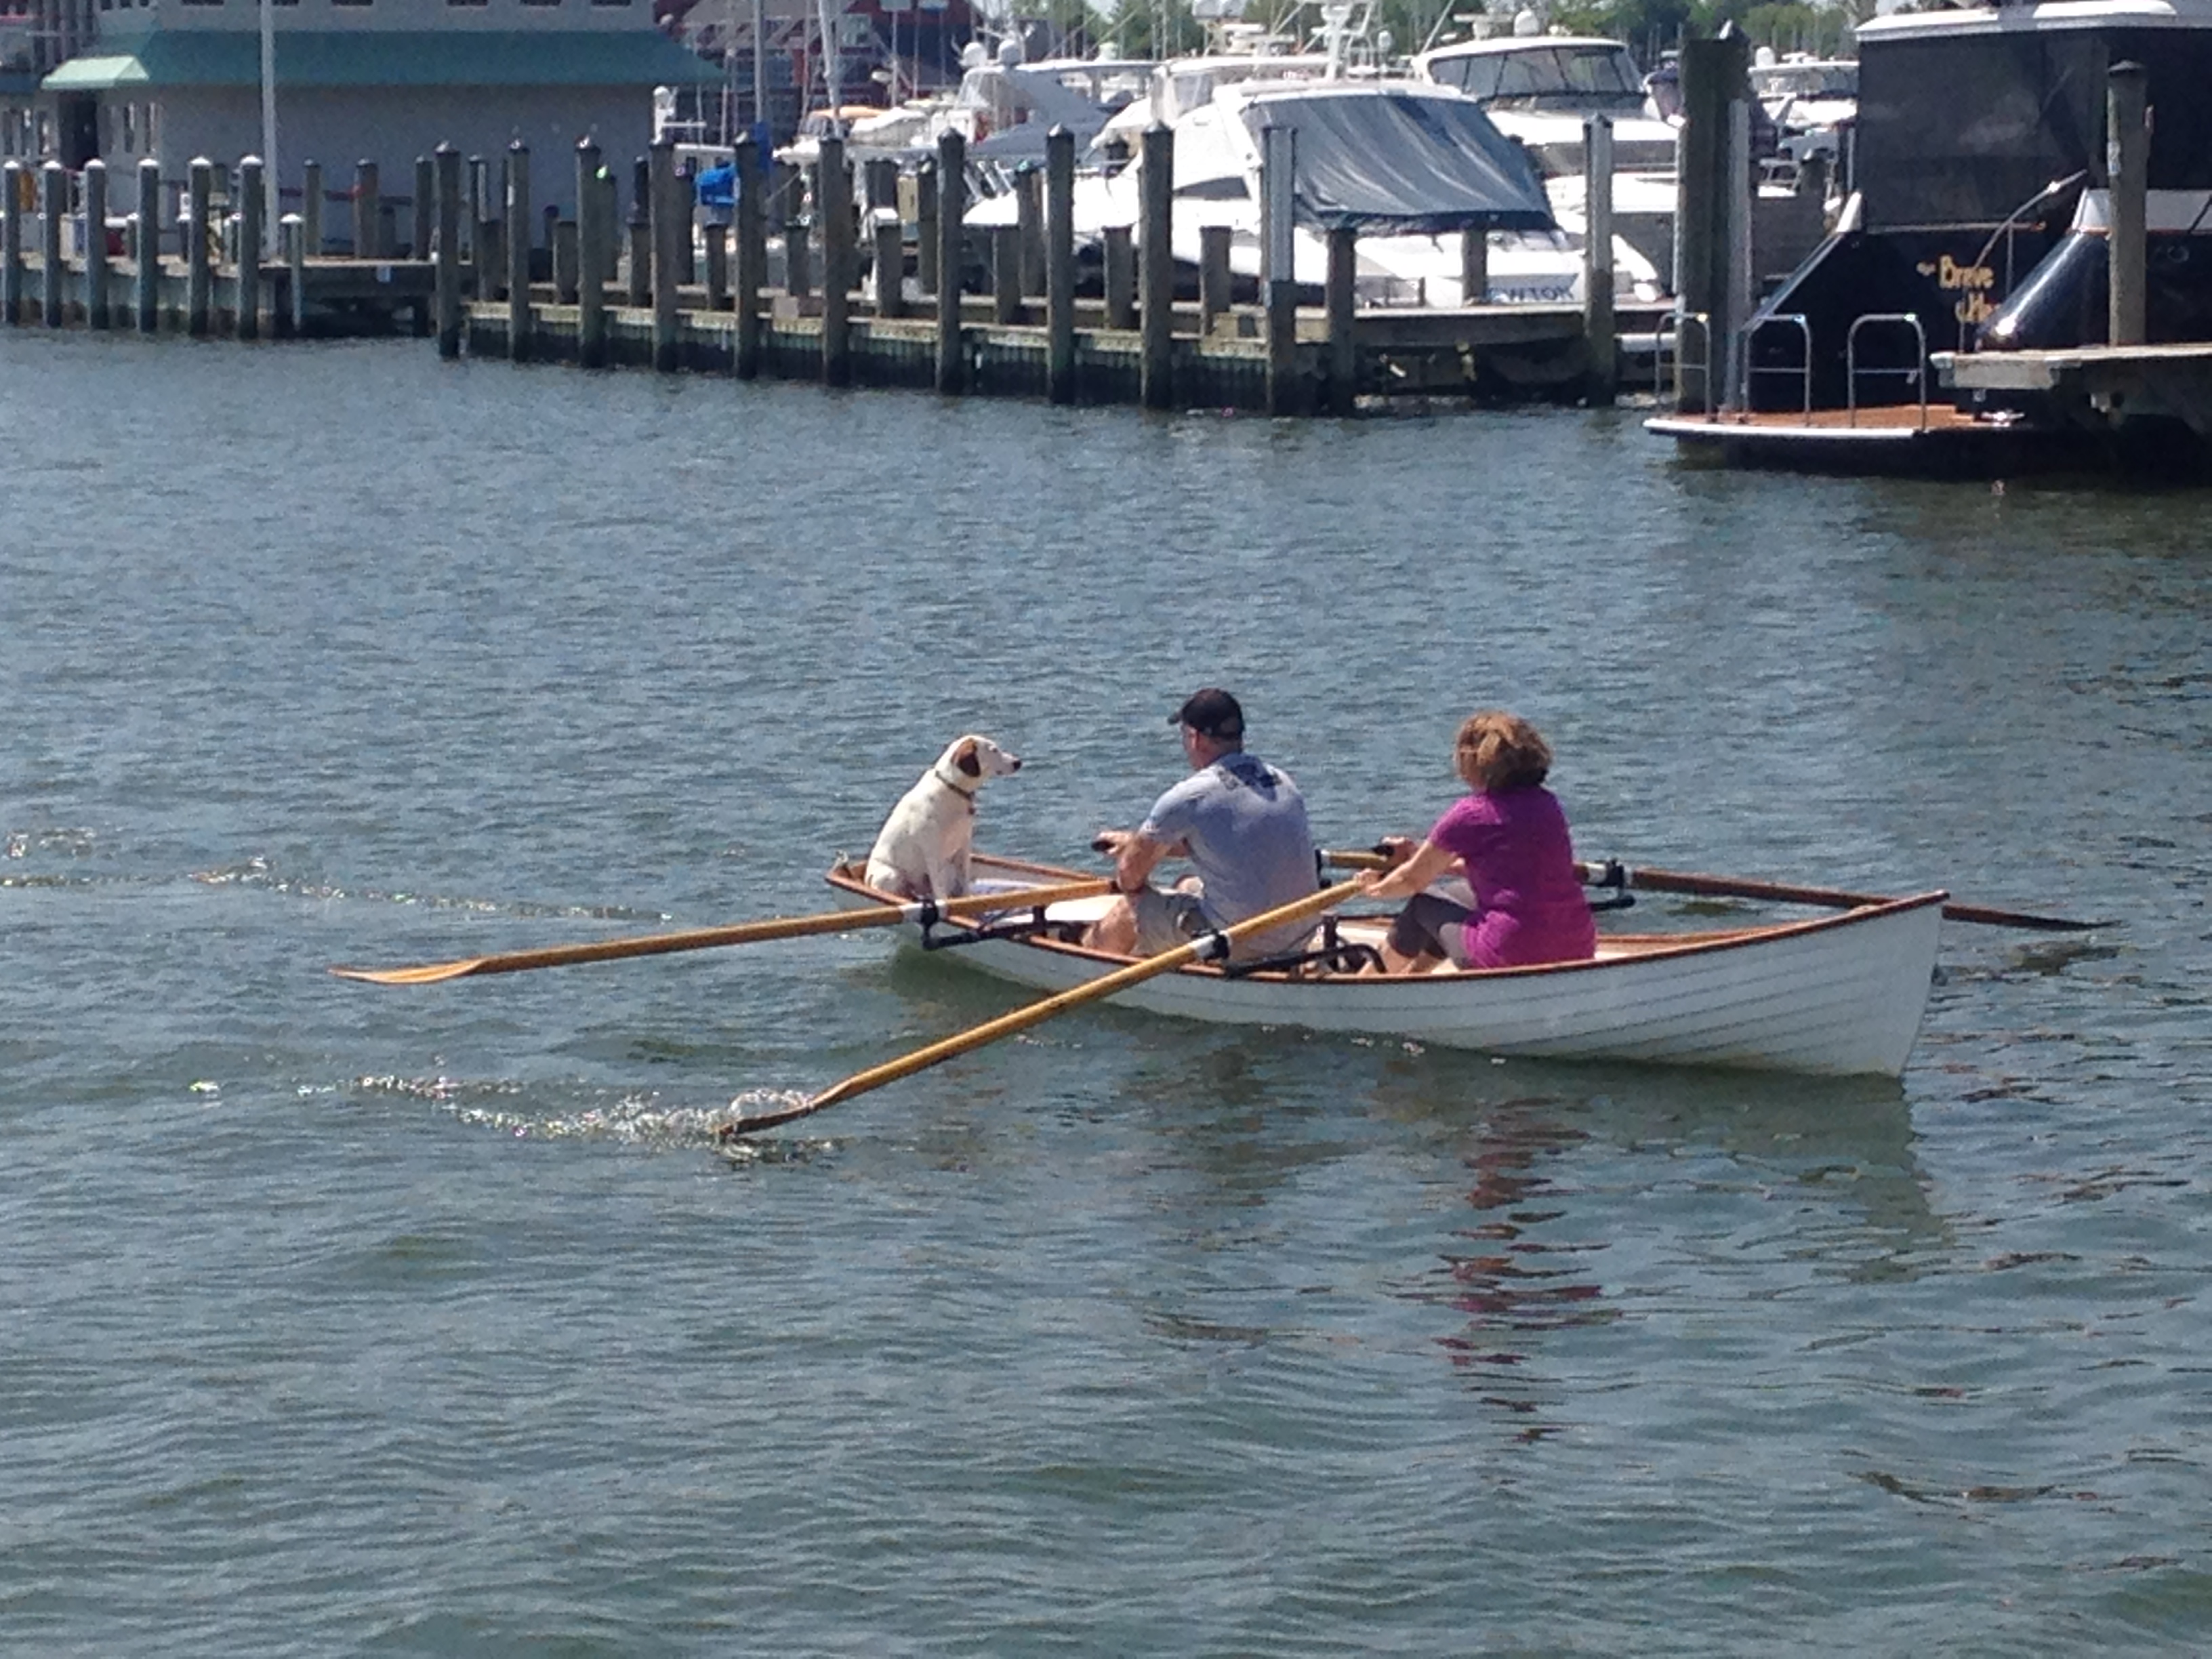 Two people rowing a wooden row boat with dog in it too